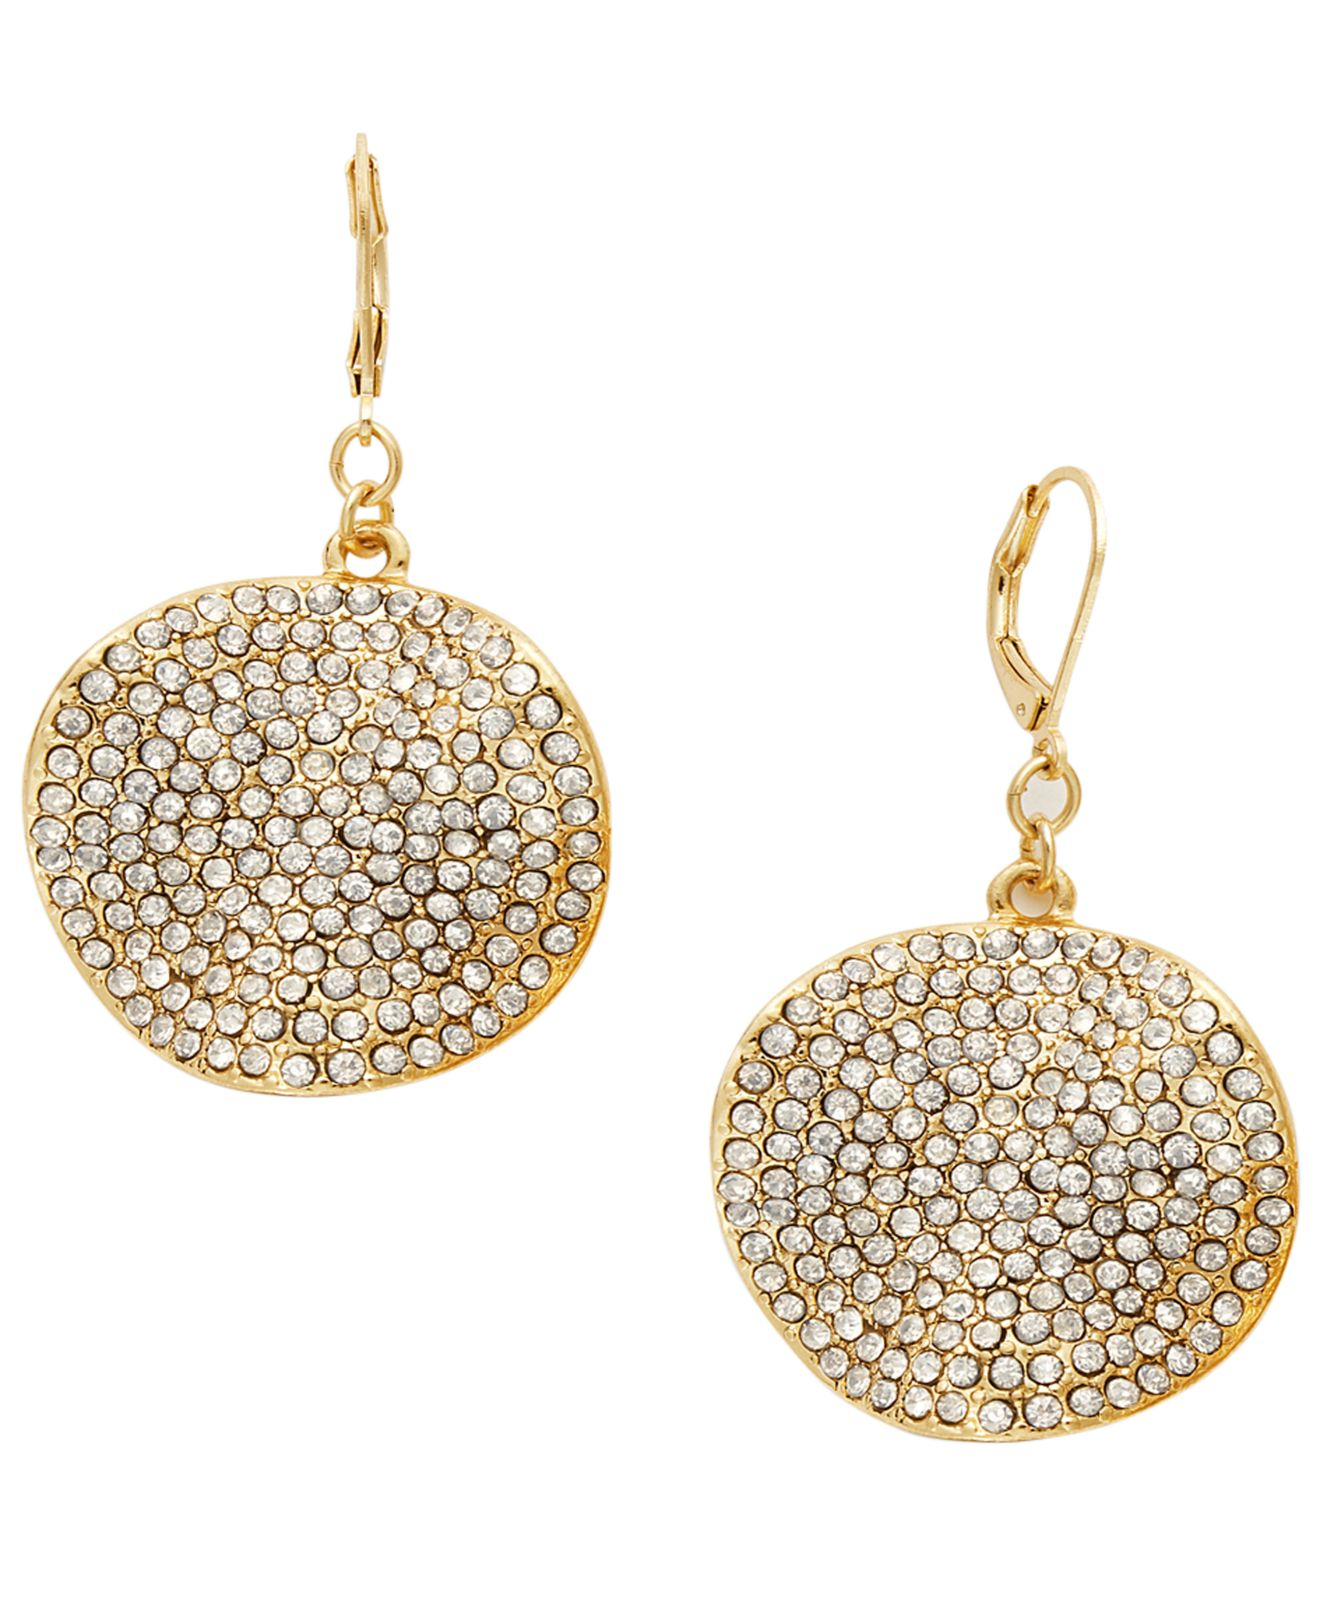 Inc international concepts Gold-tone Pave Glass Disc Earrings in ...